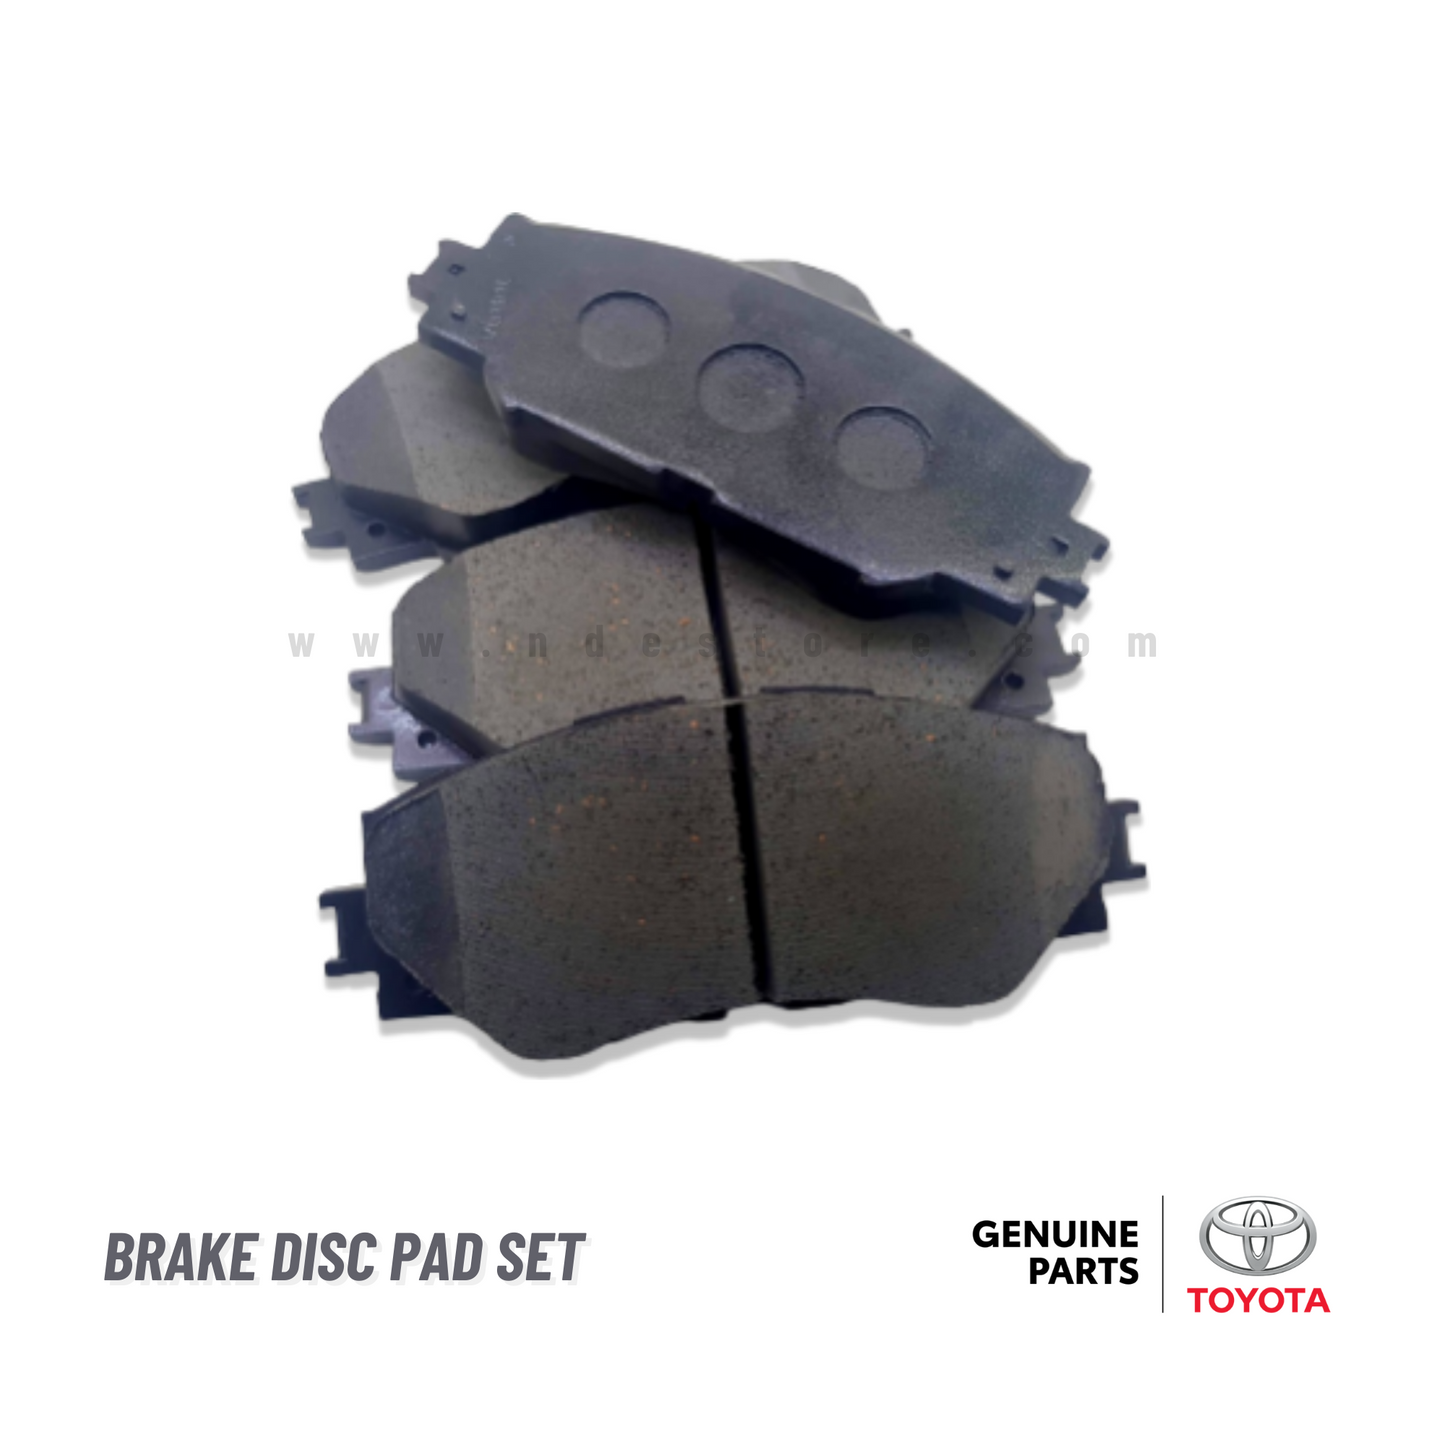 BRAKE, DISC PAD FRONT FOR TOYOTA ALTIS (M/T) (TOYOTA GENUINE PART)